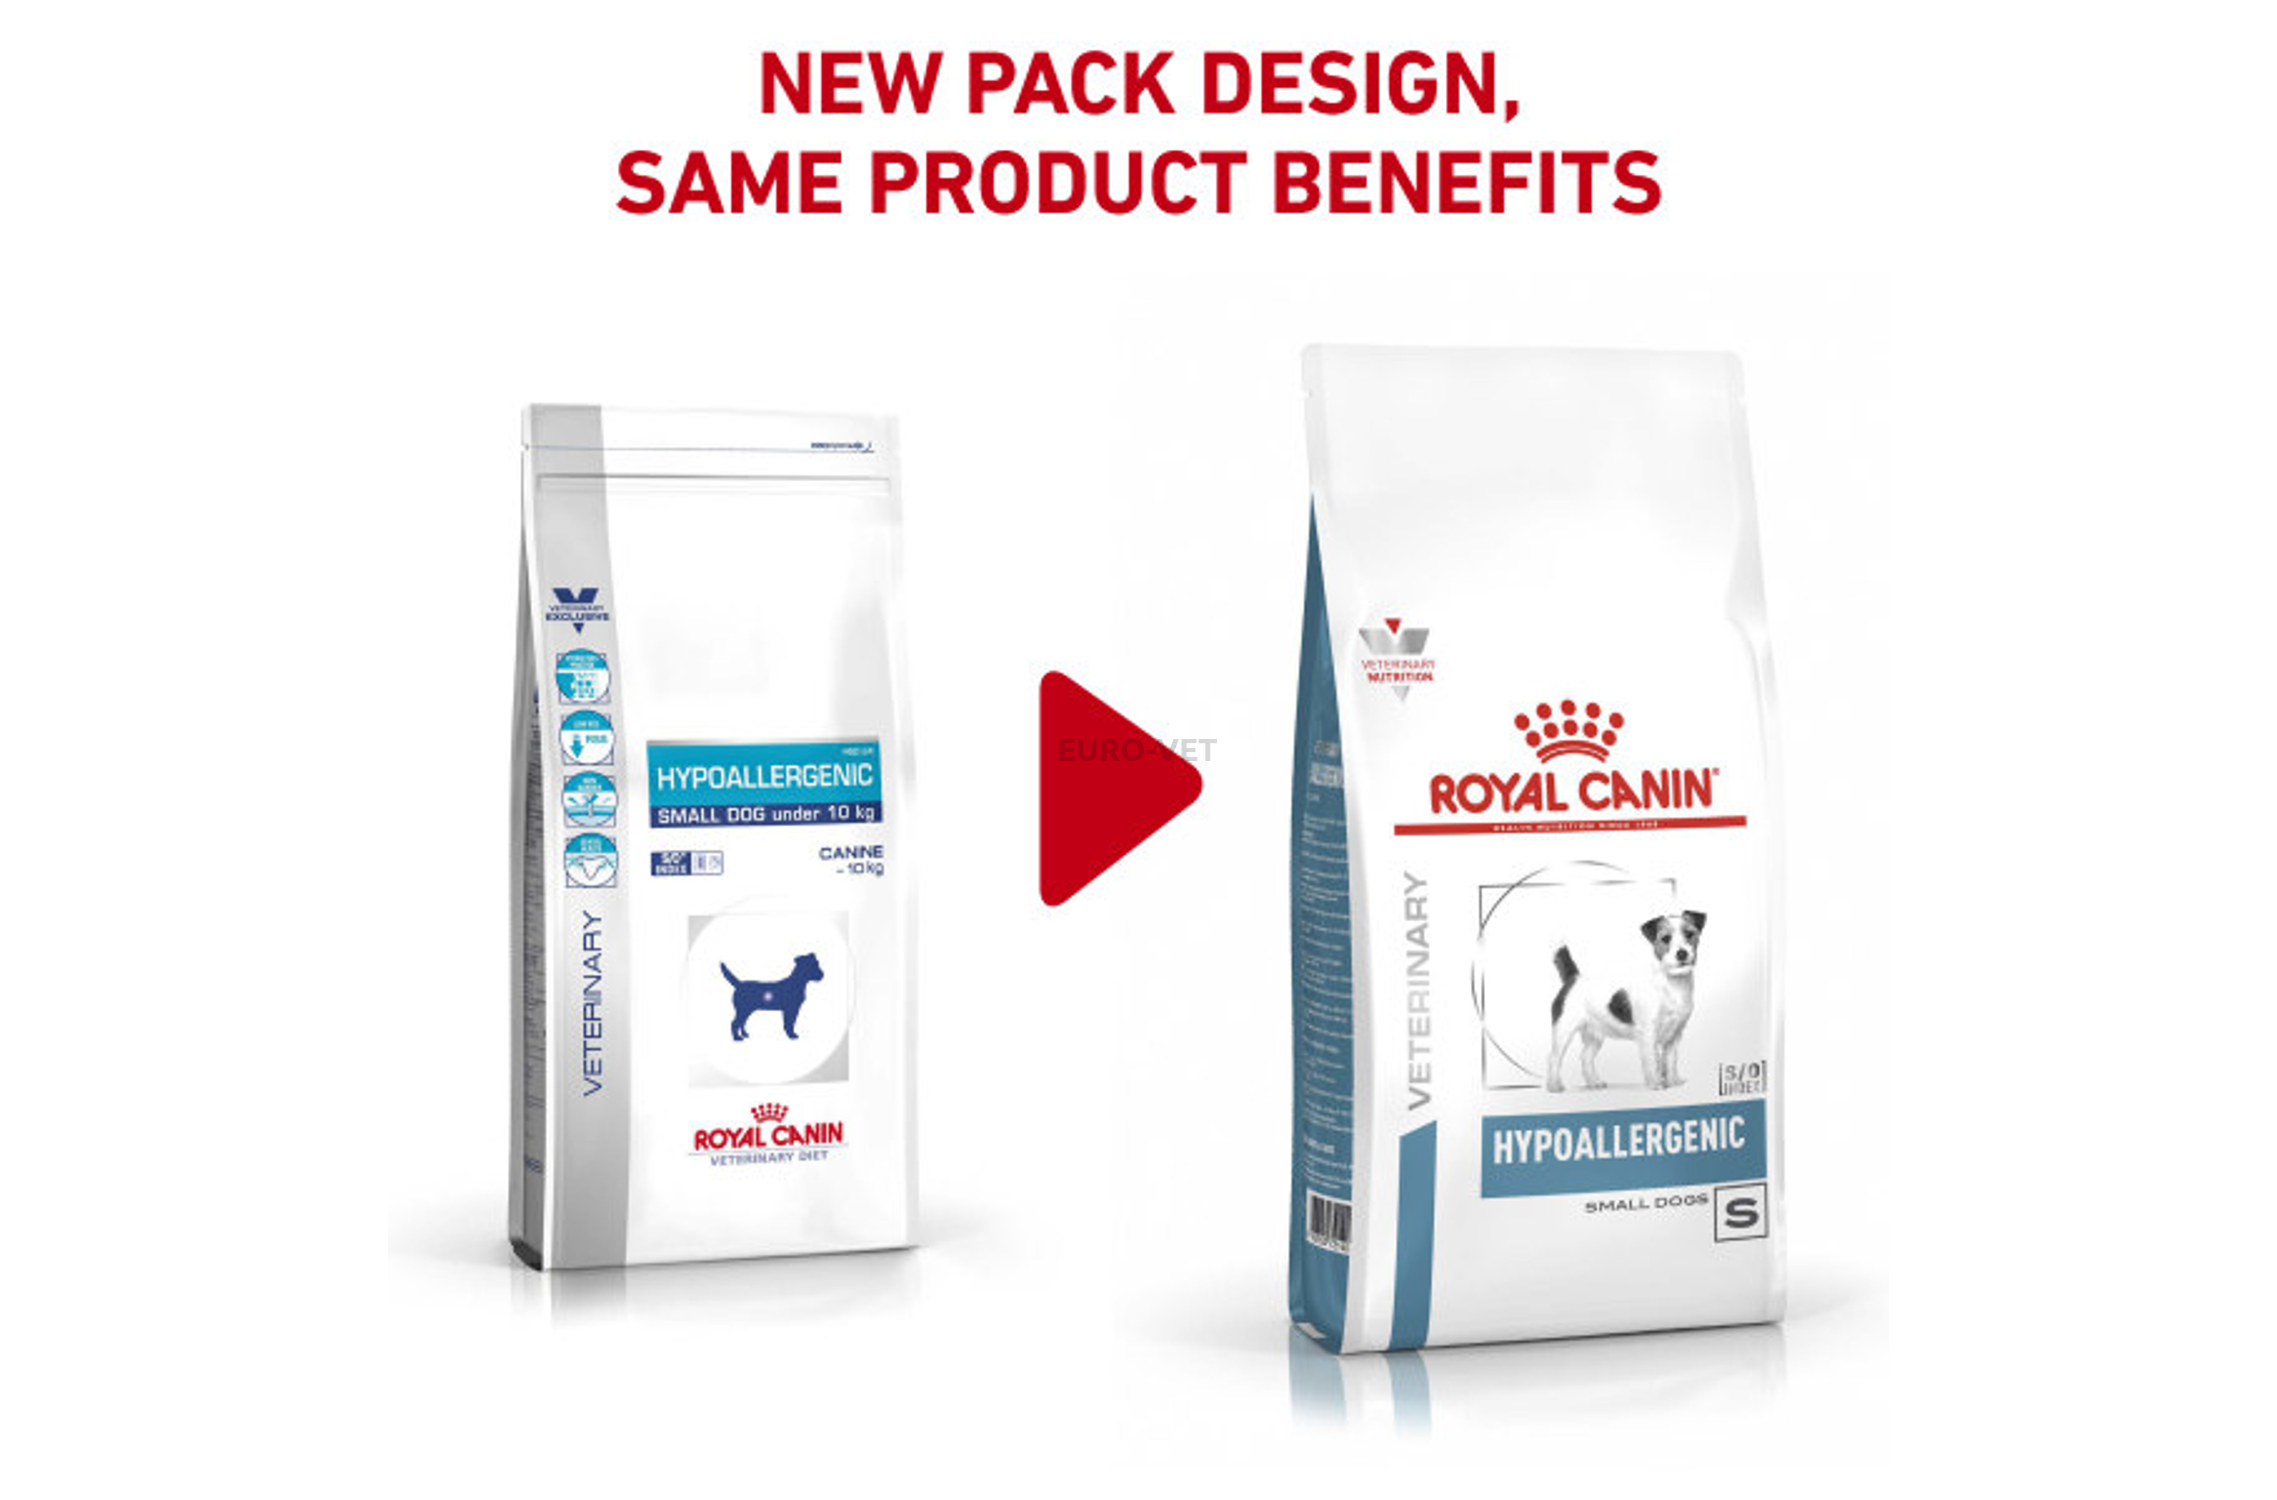 hypoallergenic small dog royal canin